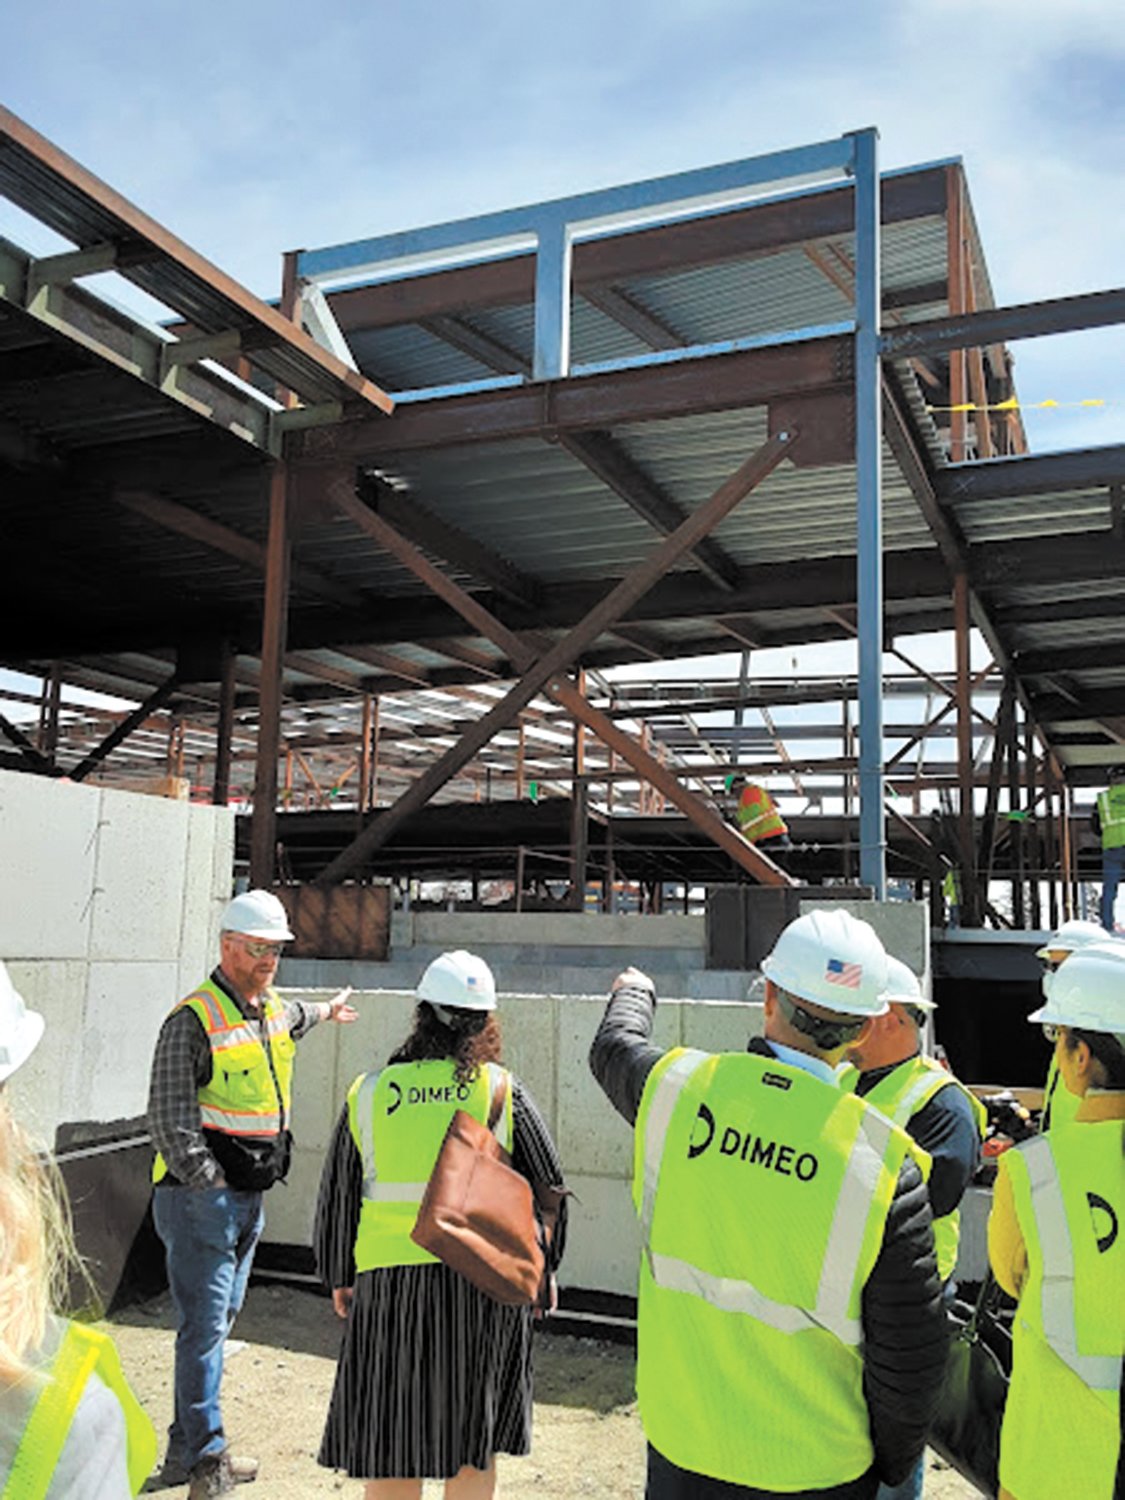 STEEL IS UP: The tour included a site walk through the construction area and a tour of the current phase of construction in which the steel beams are being erected.